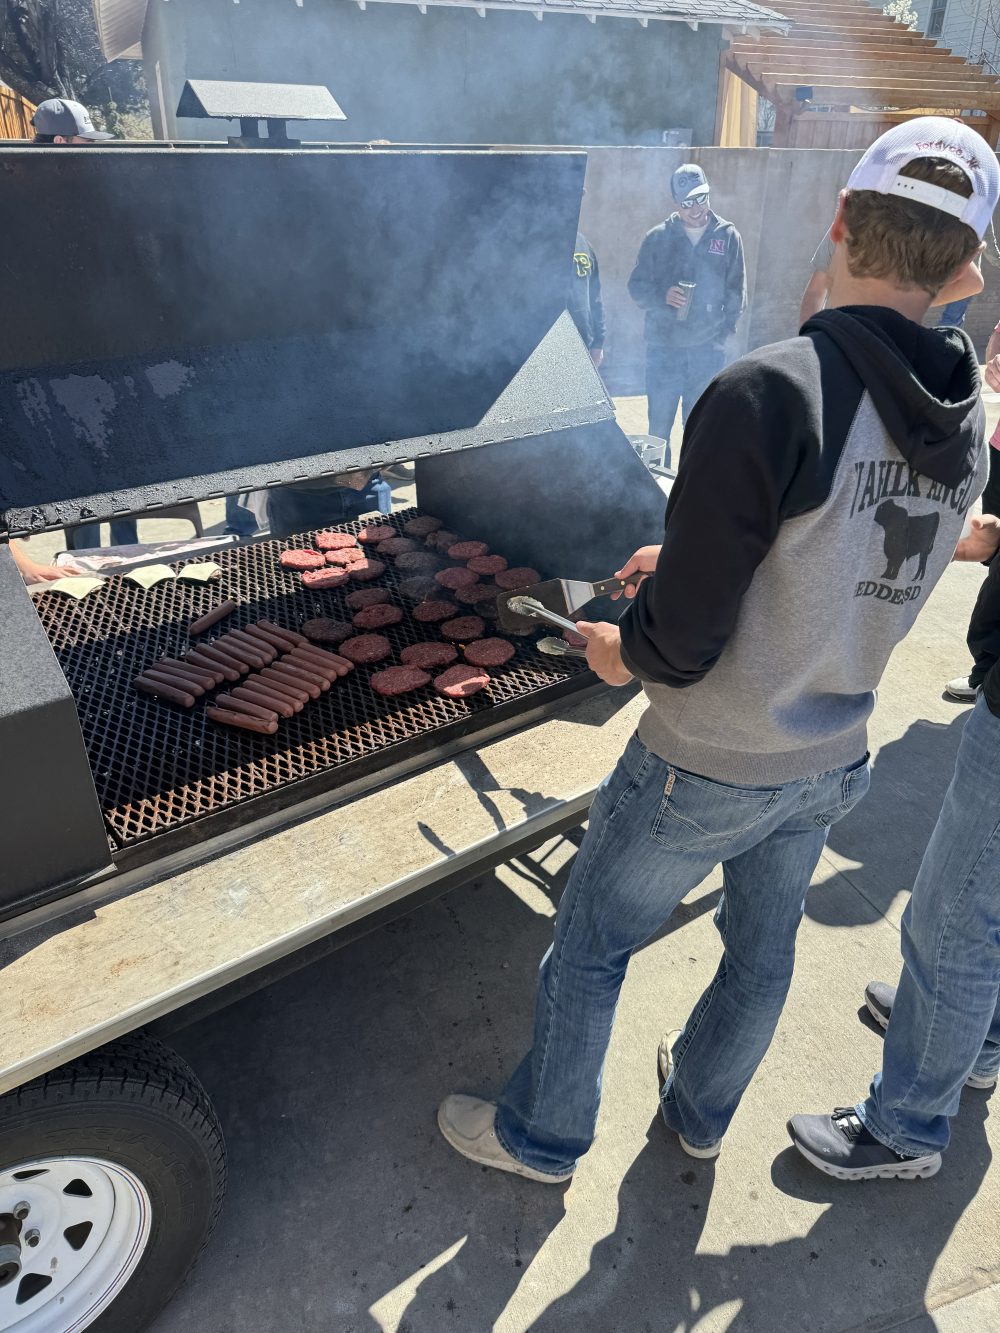 AGR brothers cooked for FFA students who visited the Kappa Chapter House in Lincoln, Nebraska